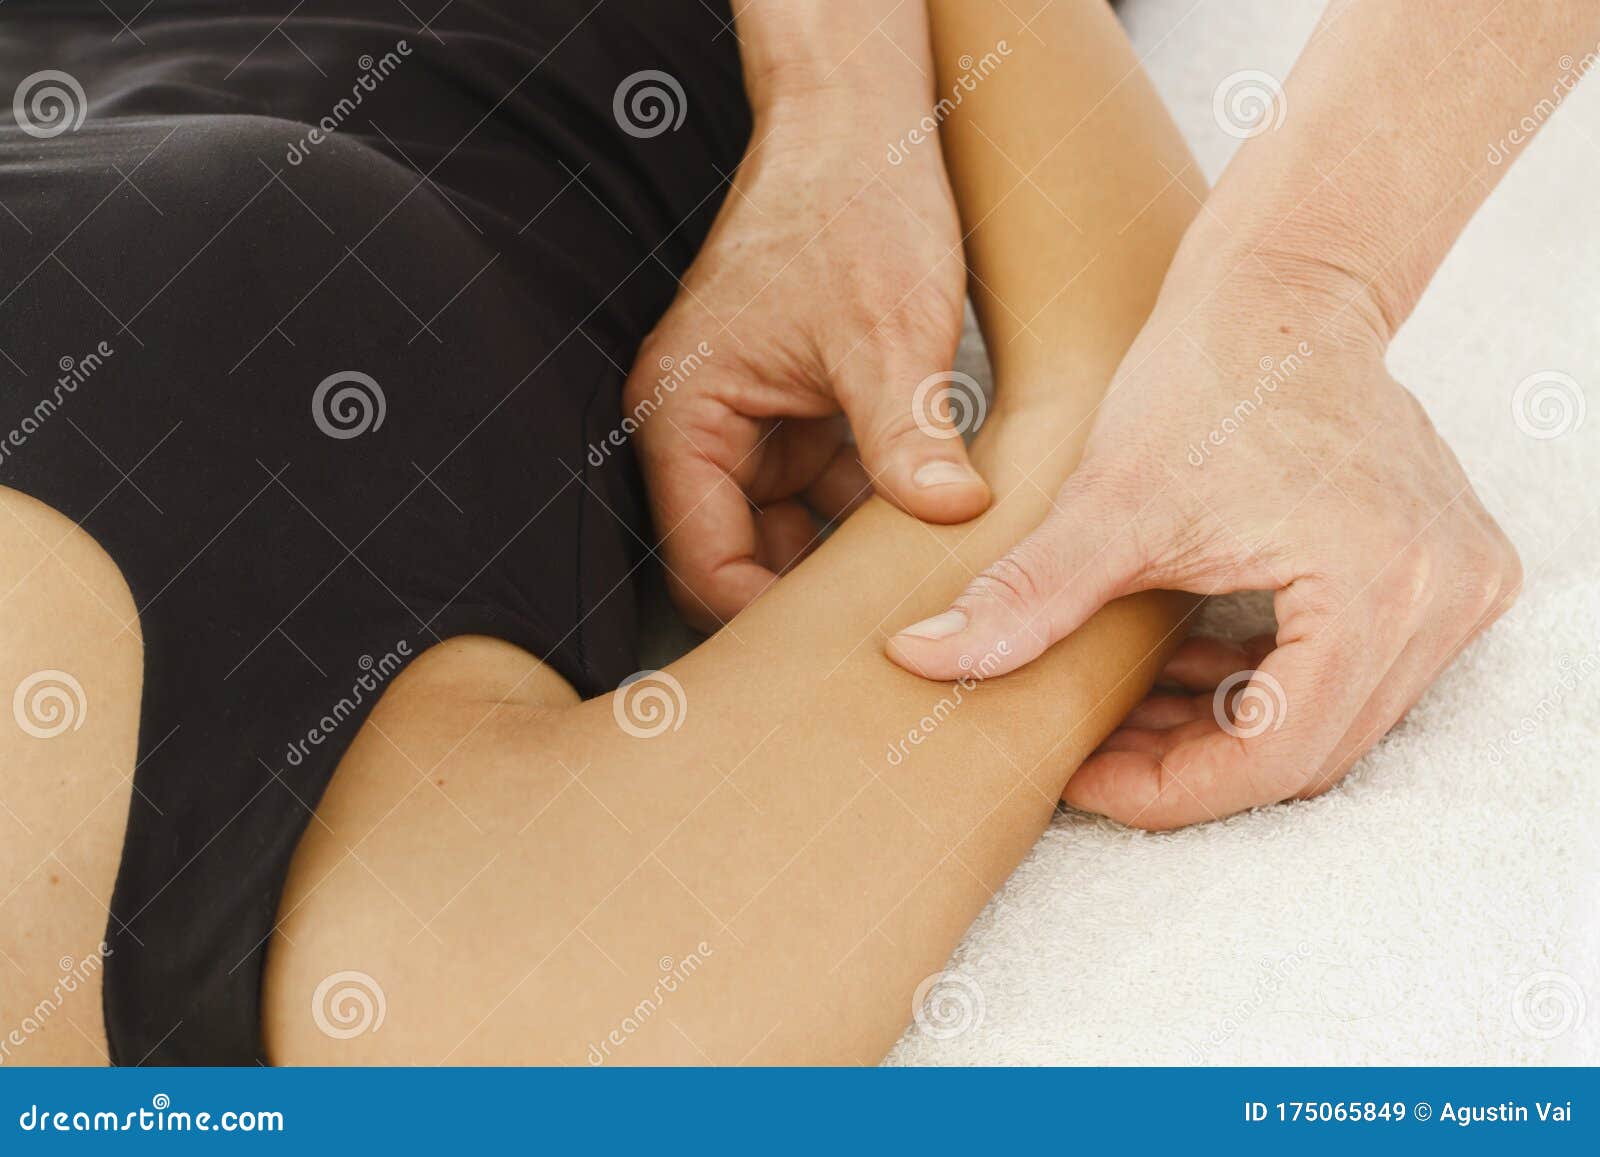 Massages And Physiotherapy To A Woman On Her Arm Stock Image Image Of